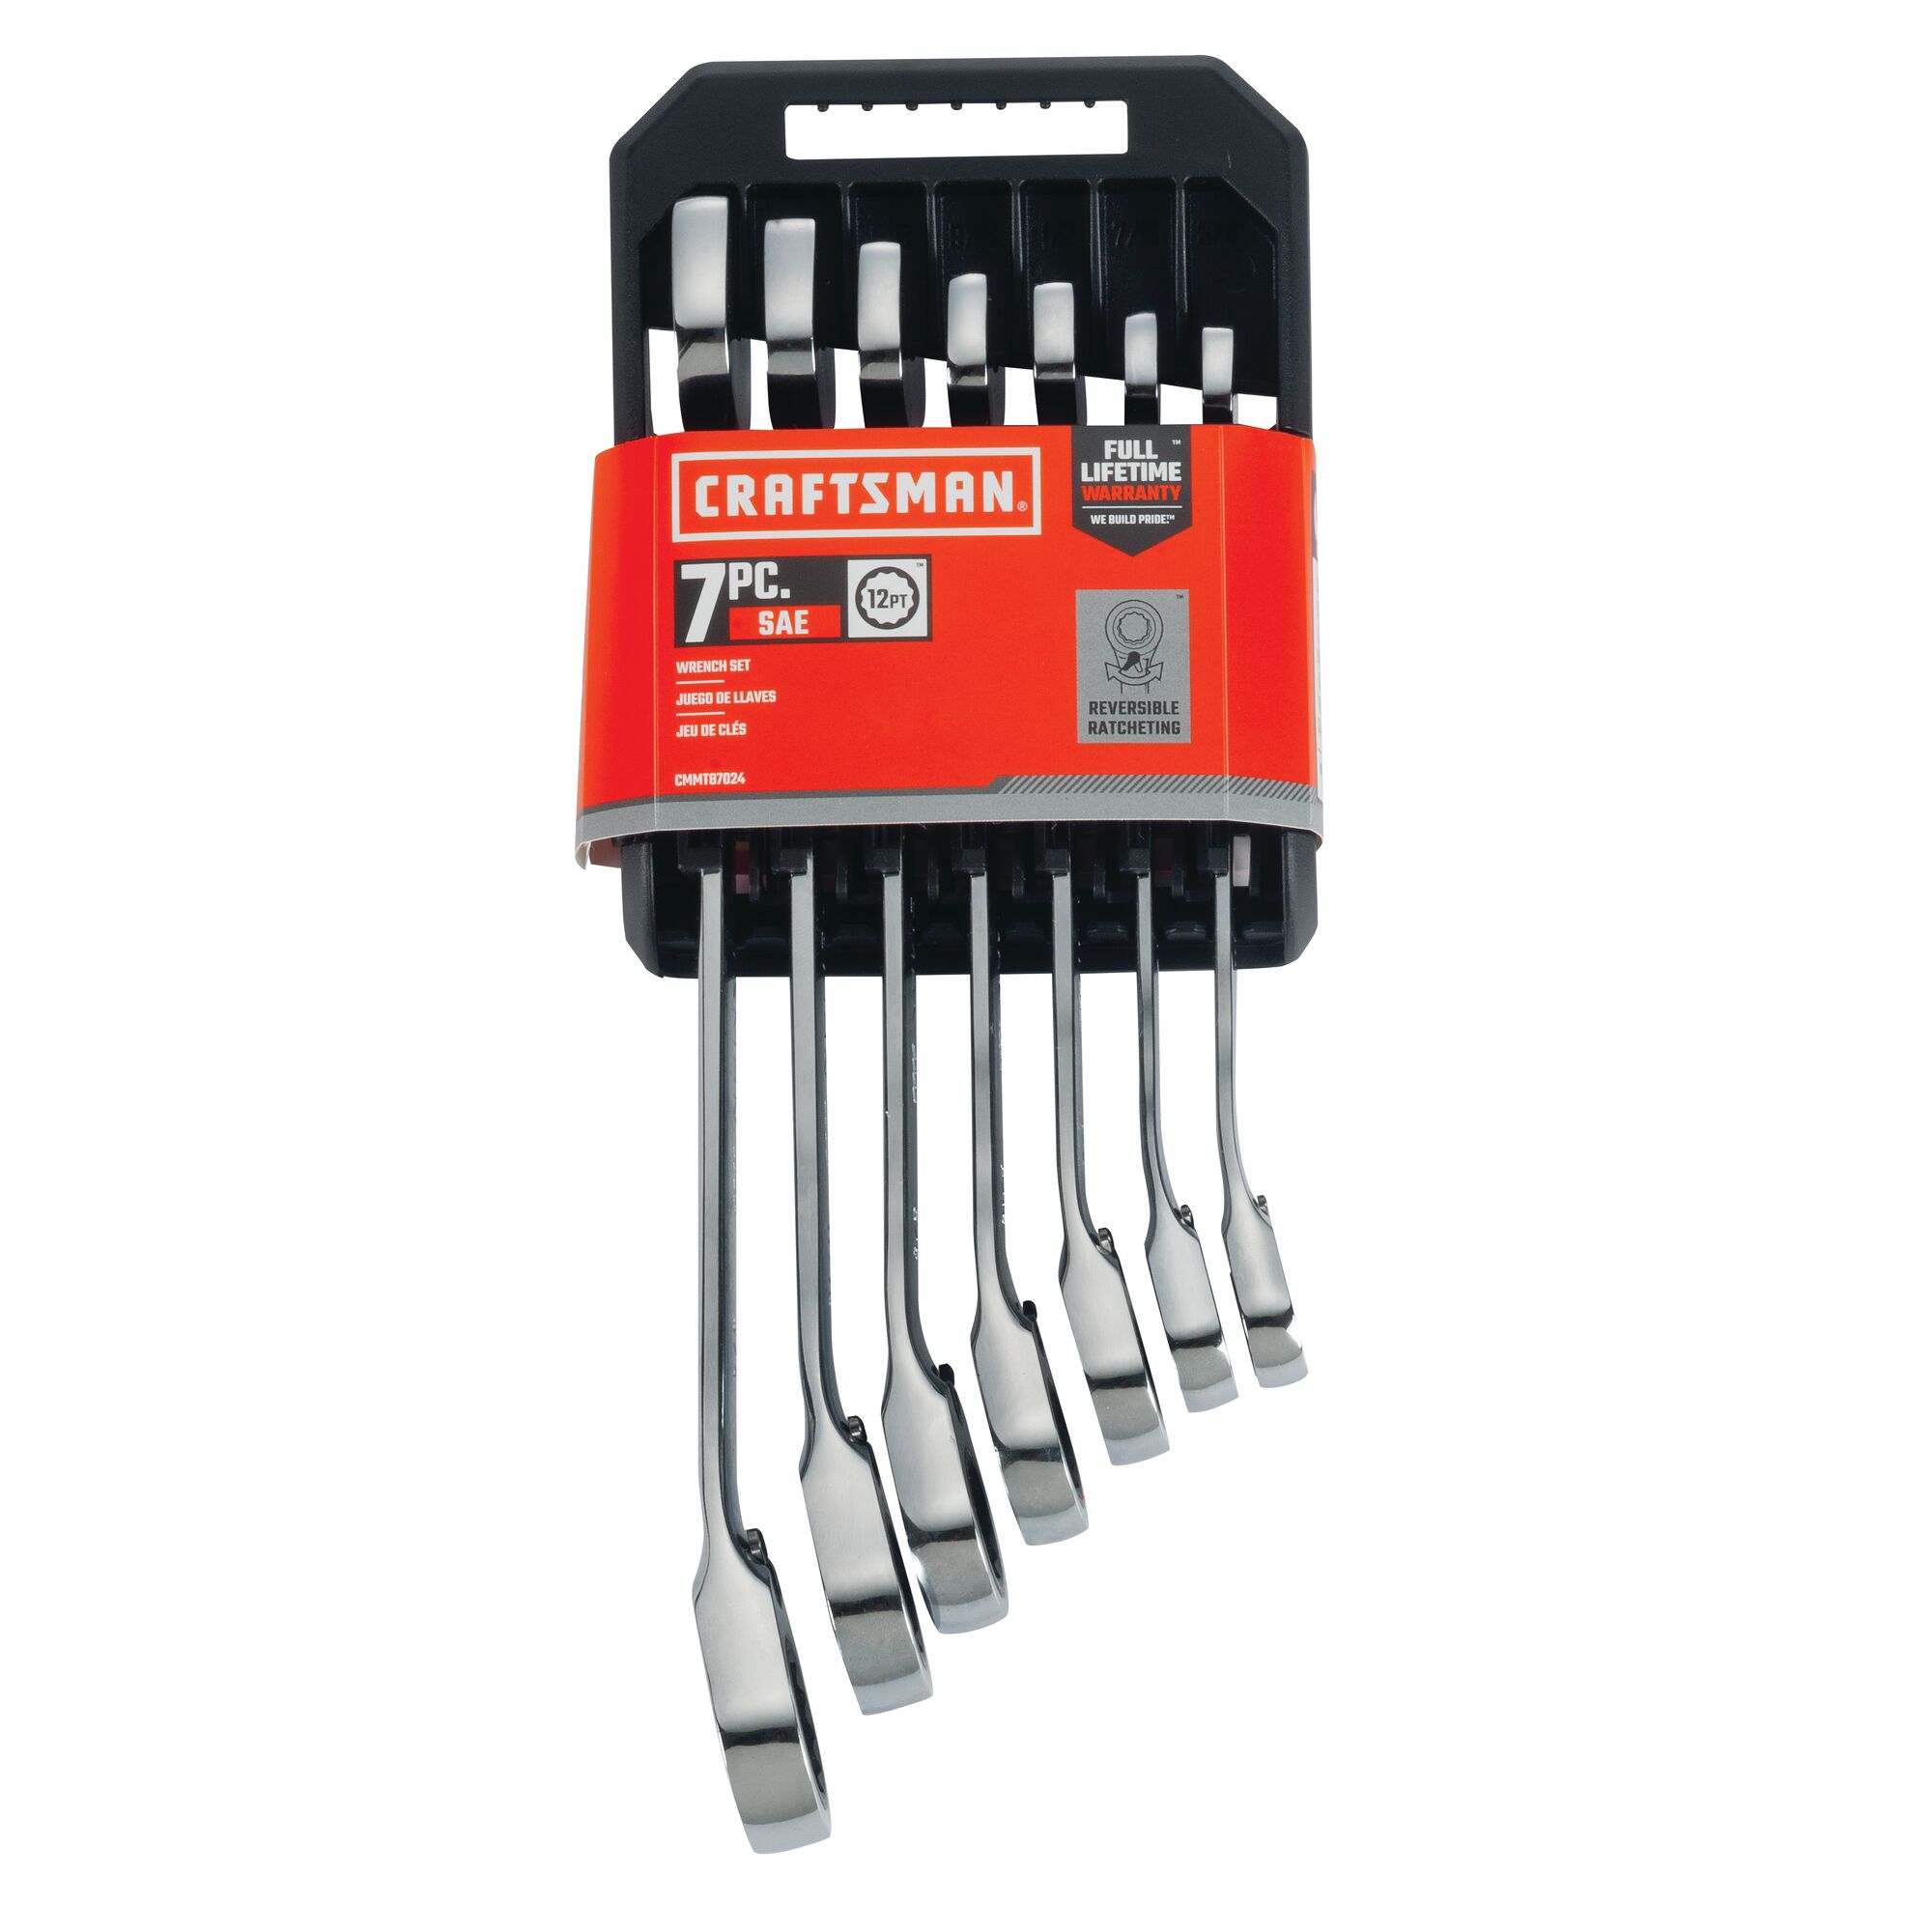 7 piece S A E reversible ratcheting wrench set in packaging.